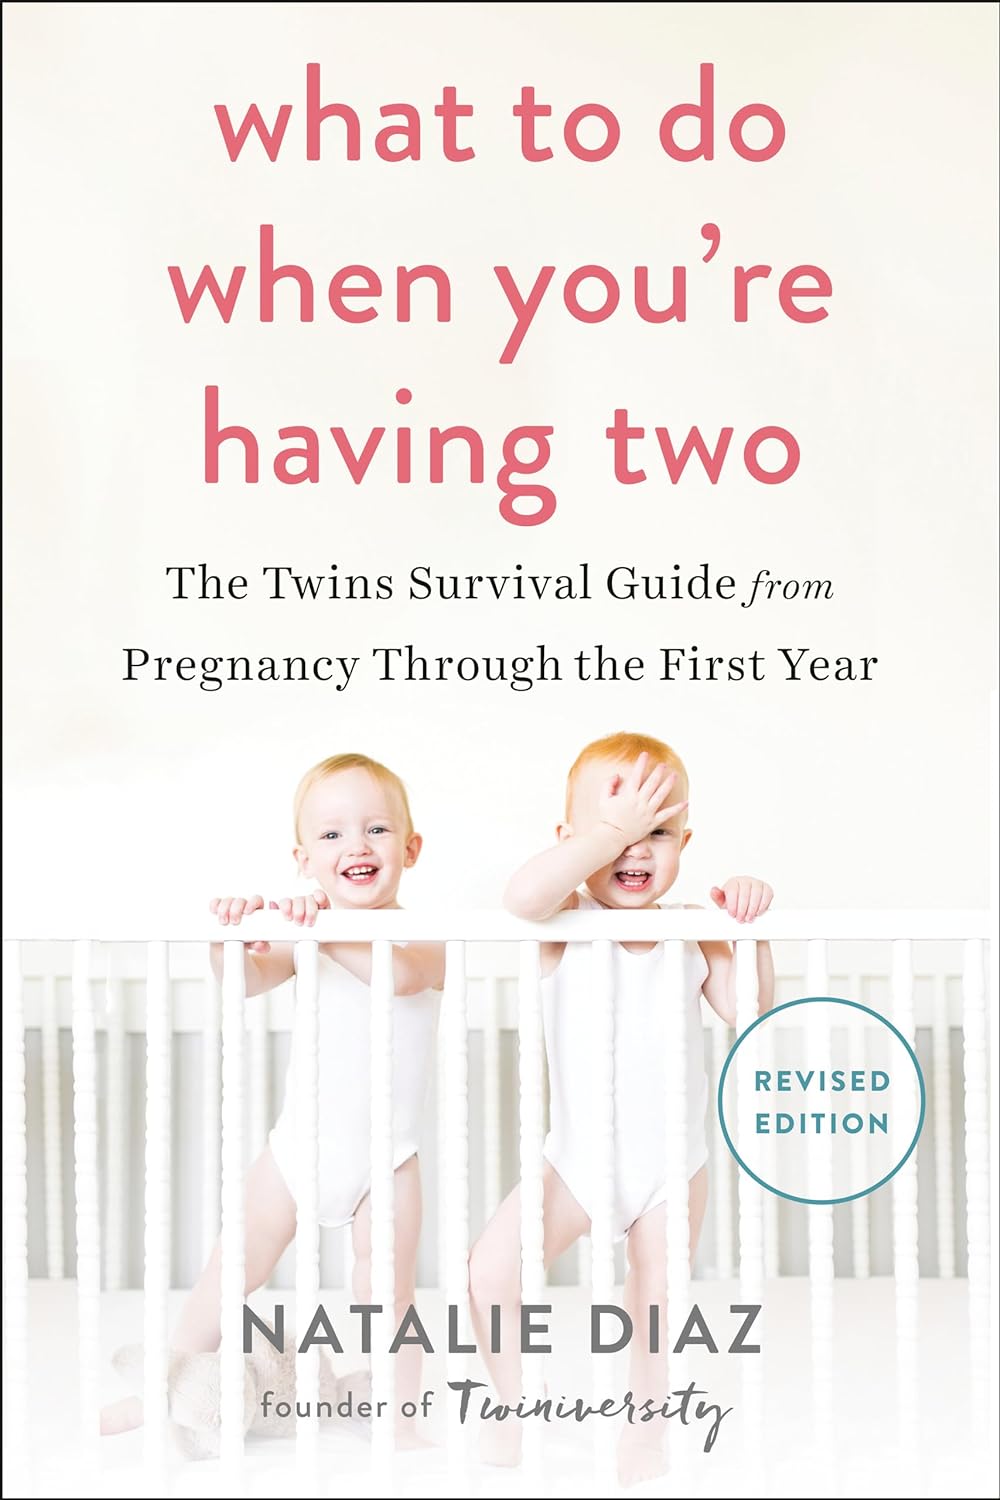 What to Do When You're Having Two by Natalie Diaz